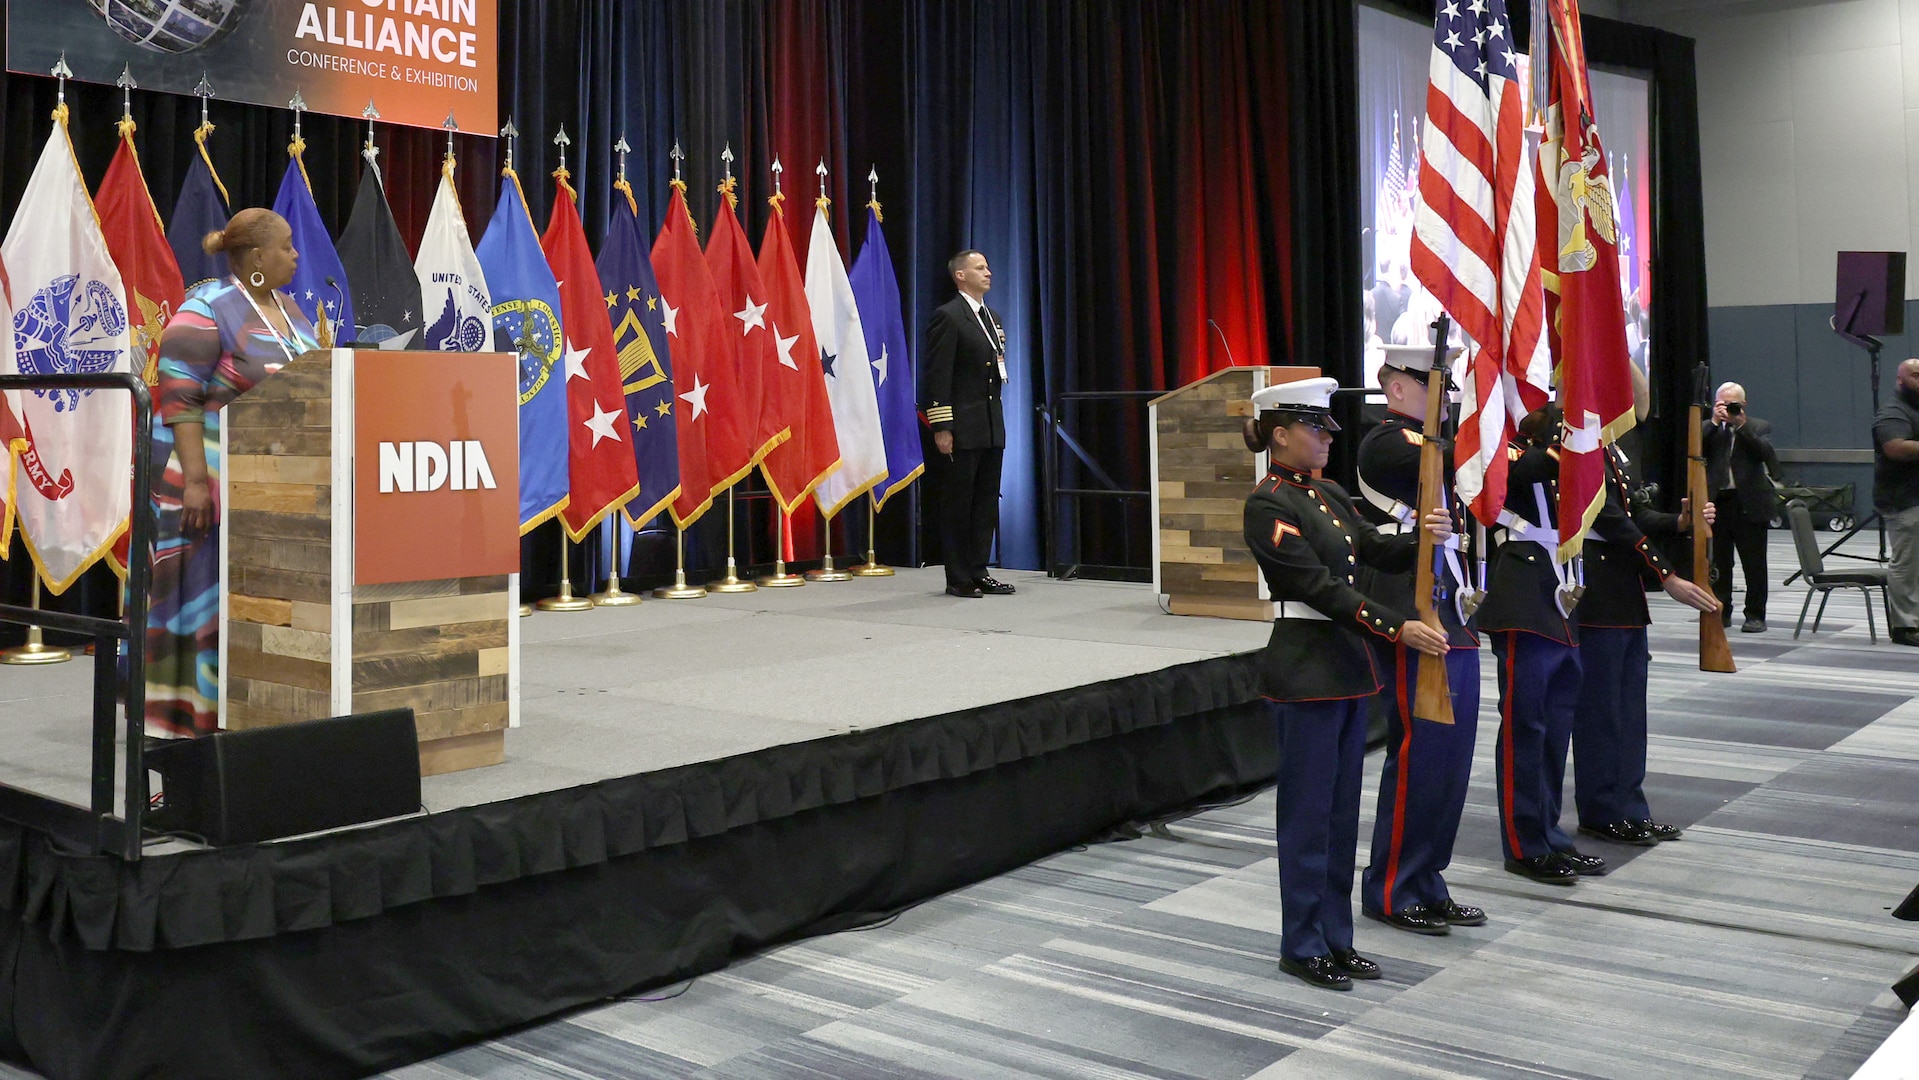 Marines present the colors and flags on stage behind.